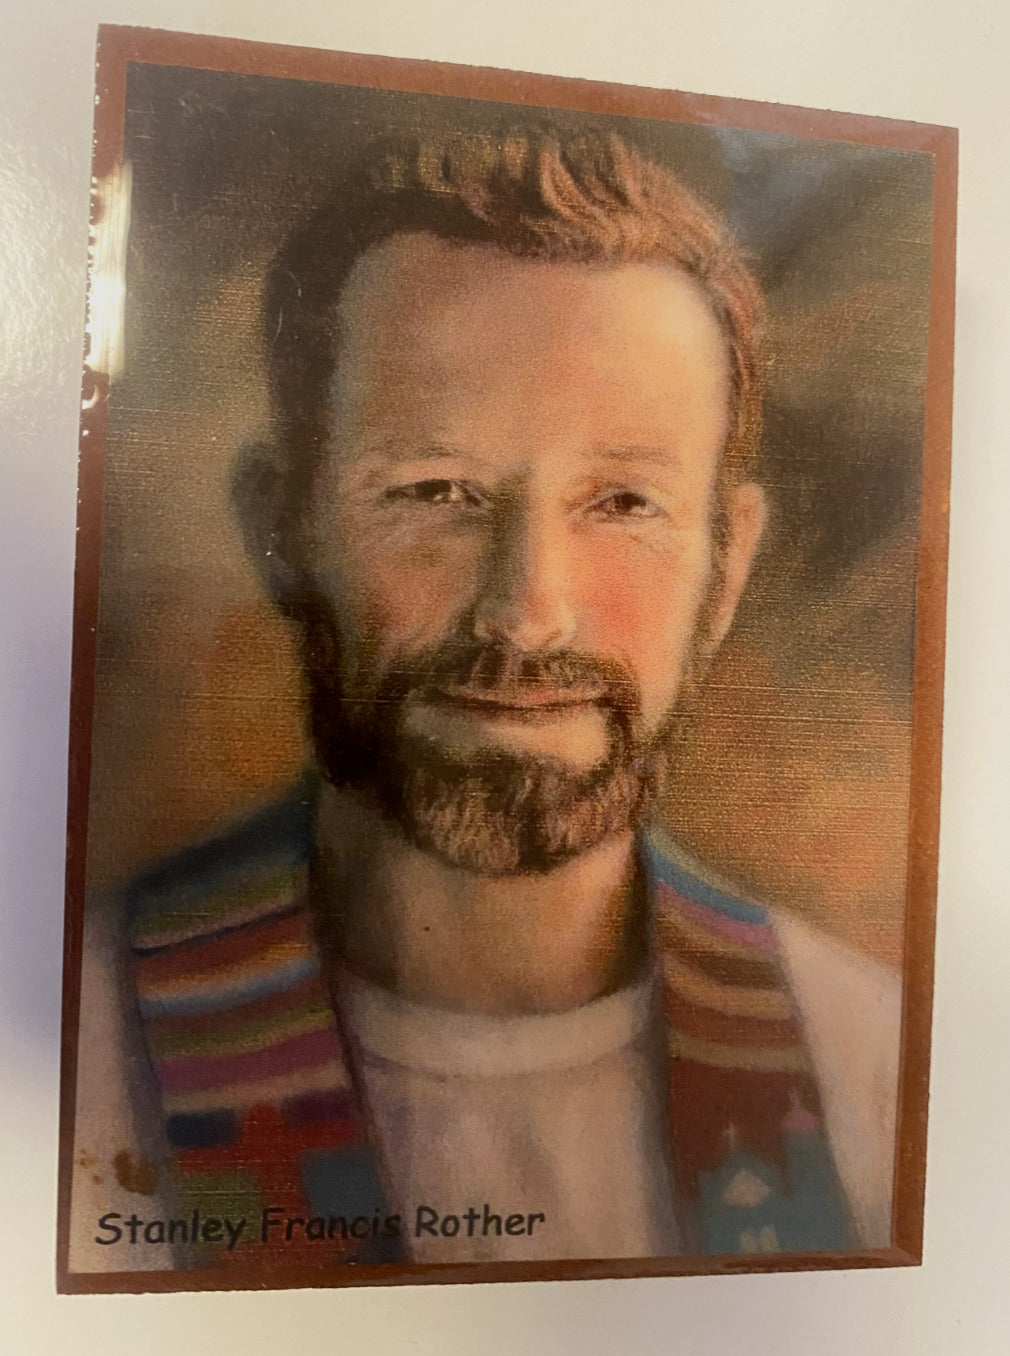 Bl Stanley Francis Rother Wood Rosary Box with Rosary, New from Colombia - Bob and Penny Lord